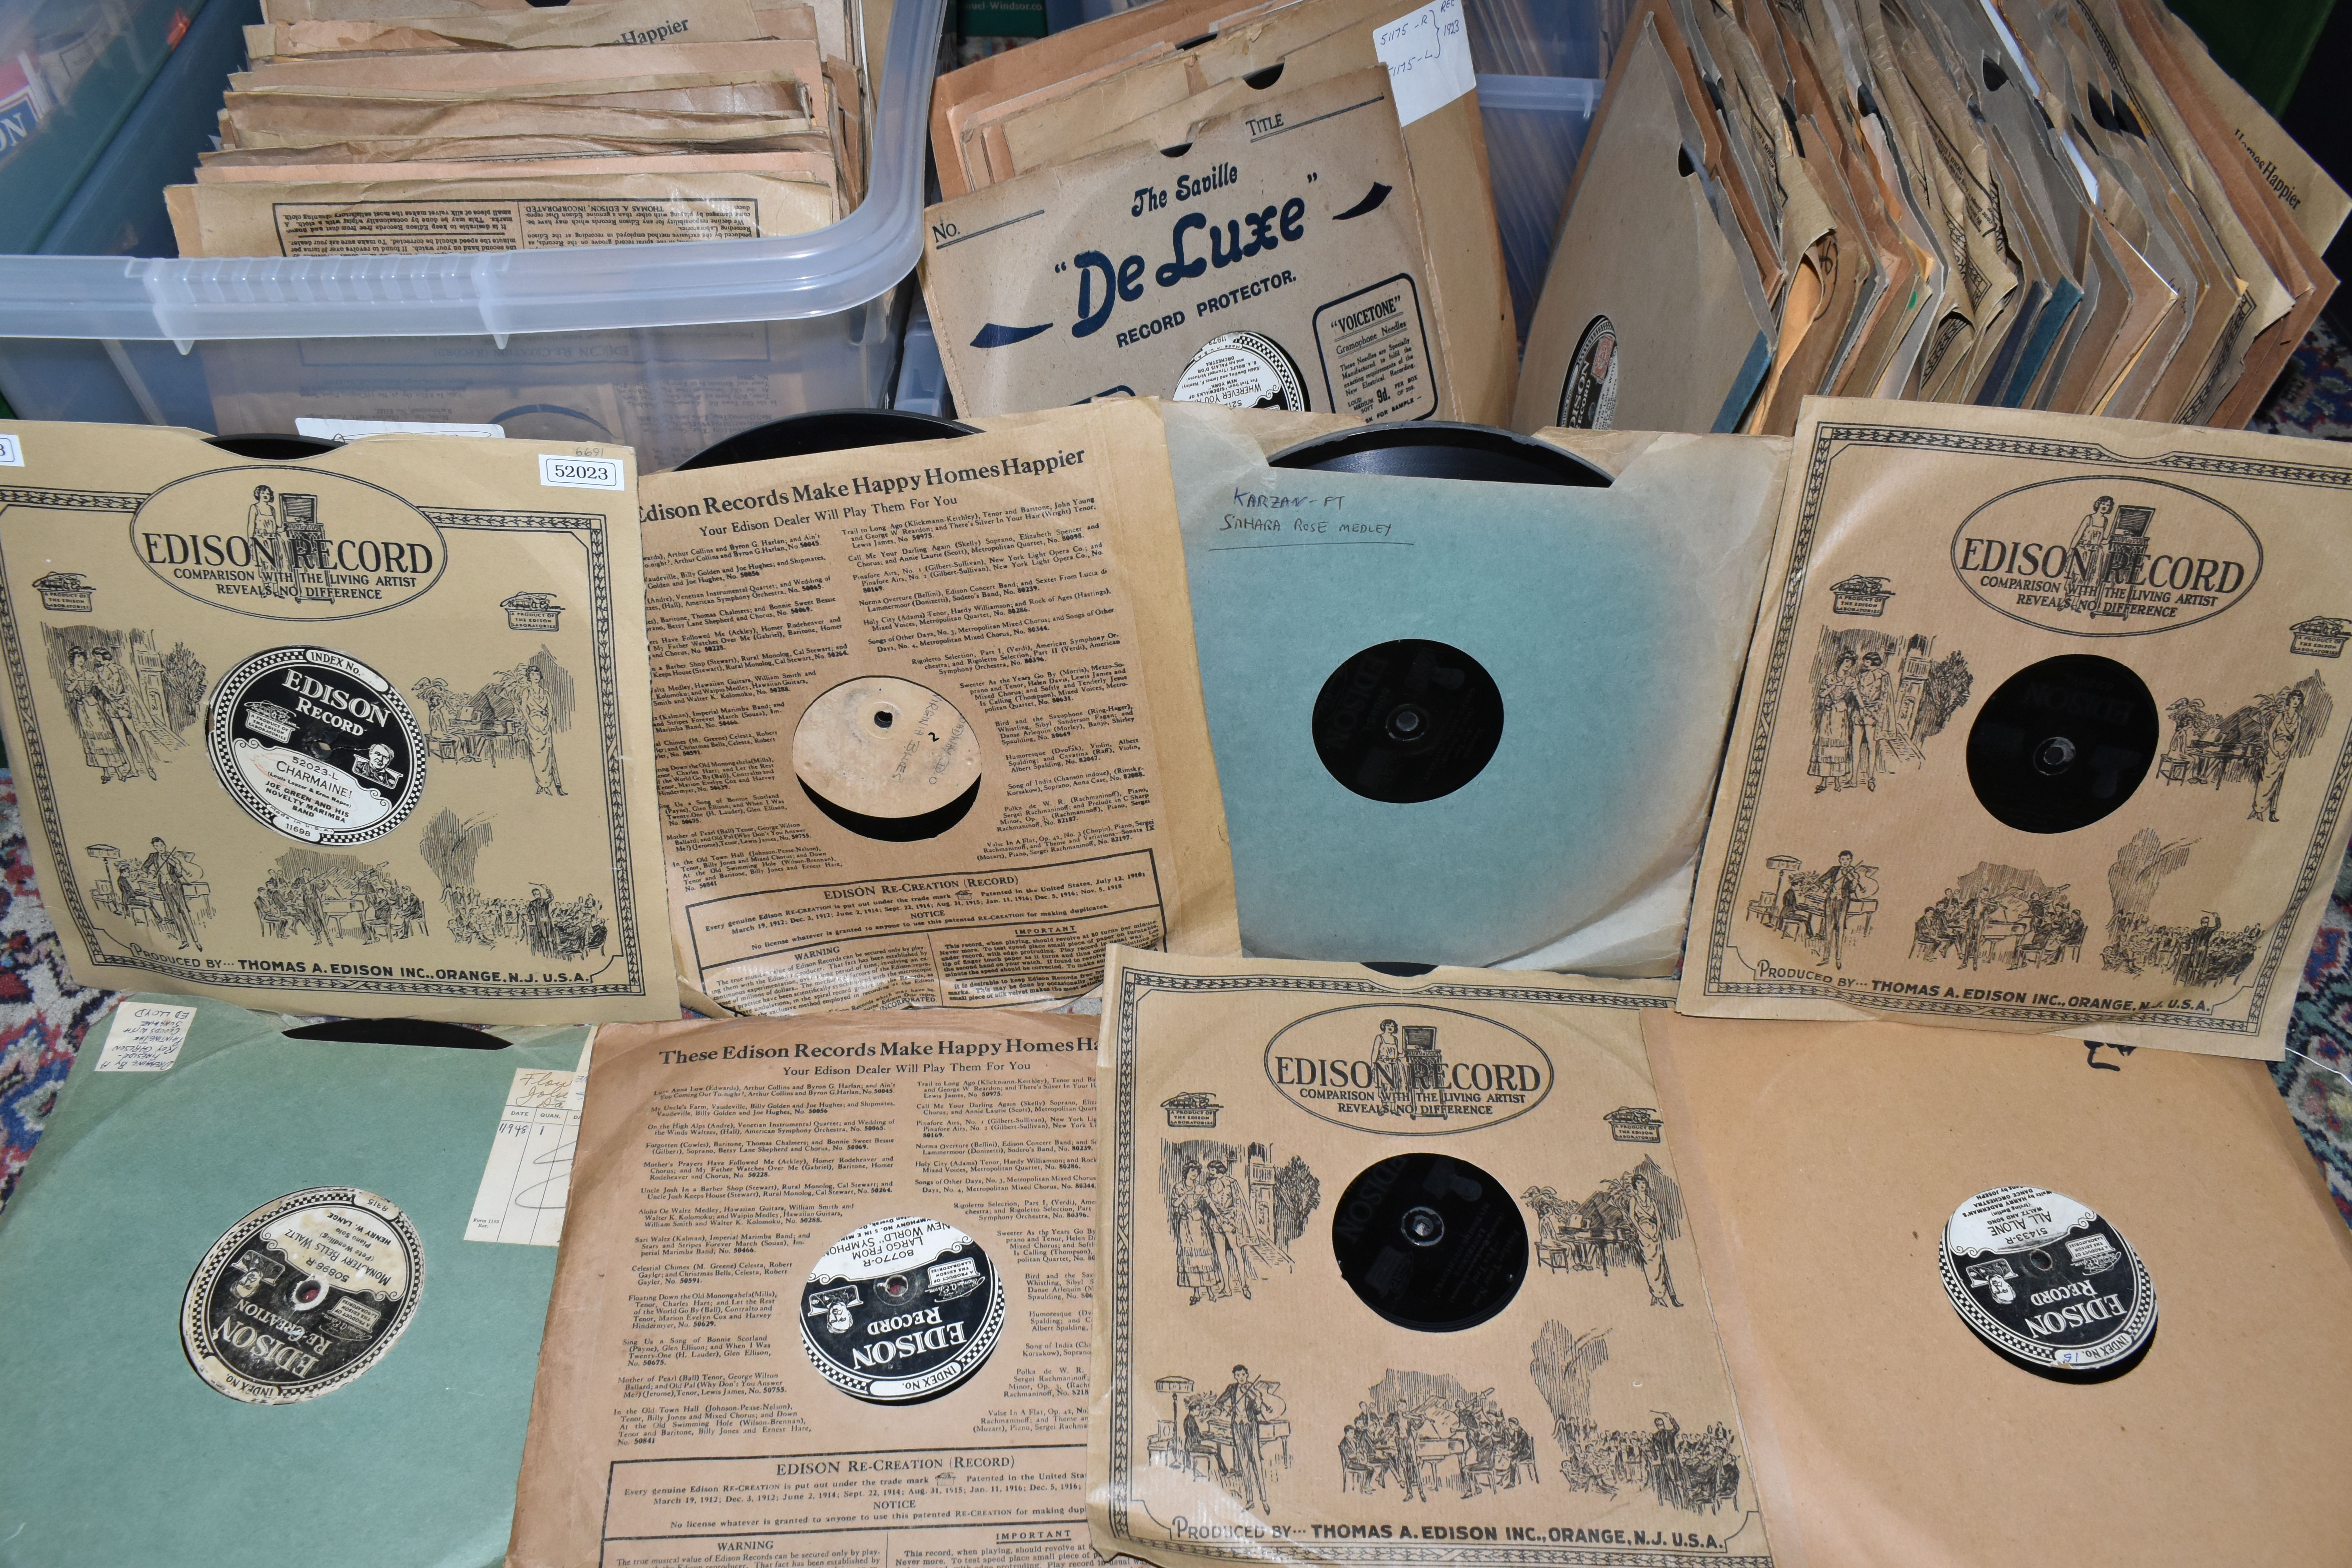 THREE BOXES OF EDISON DISC RECORDS, styles include jazz, ragtime, music hall etc - Image 2 of 6